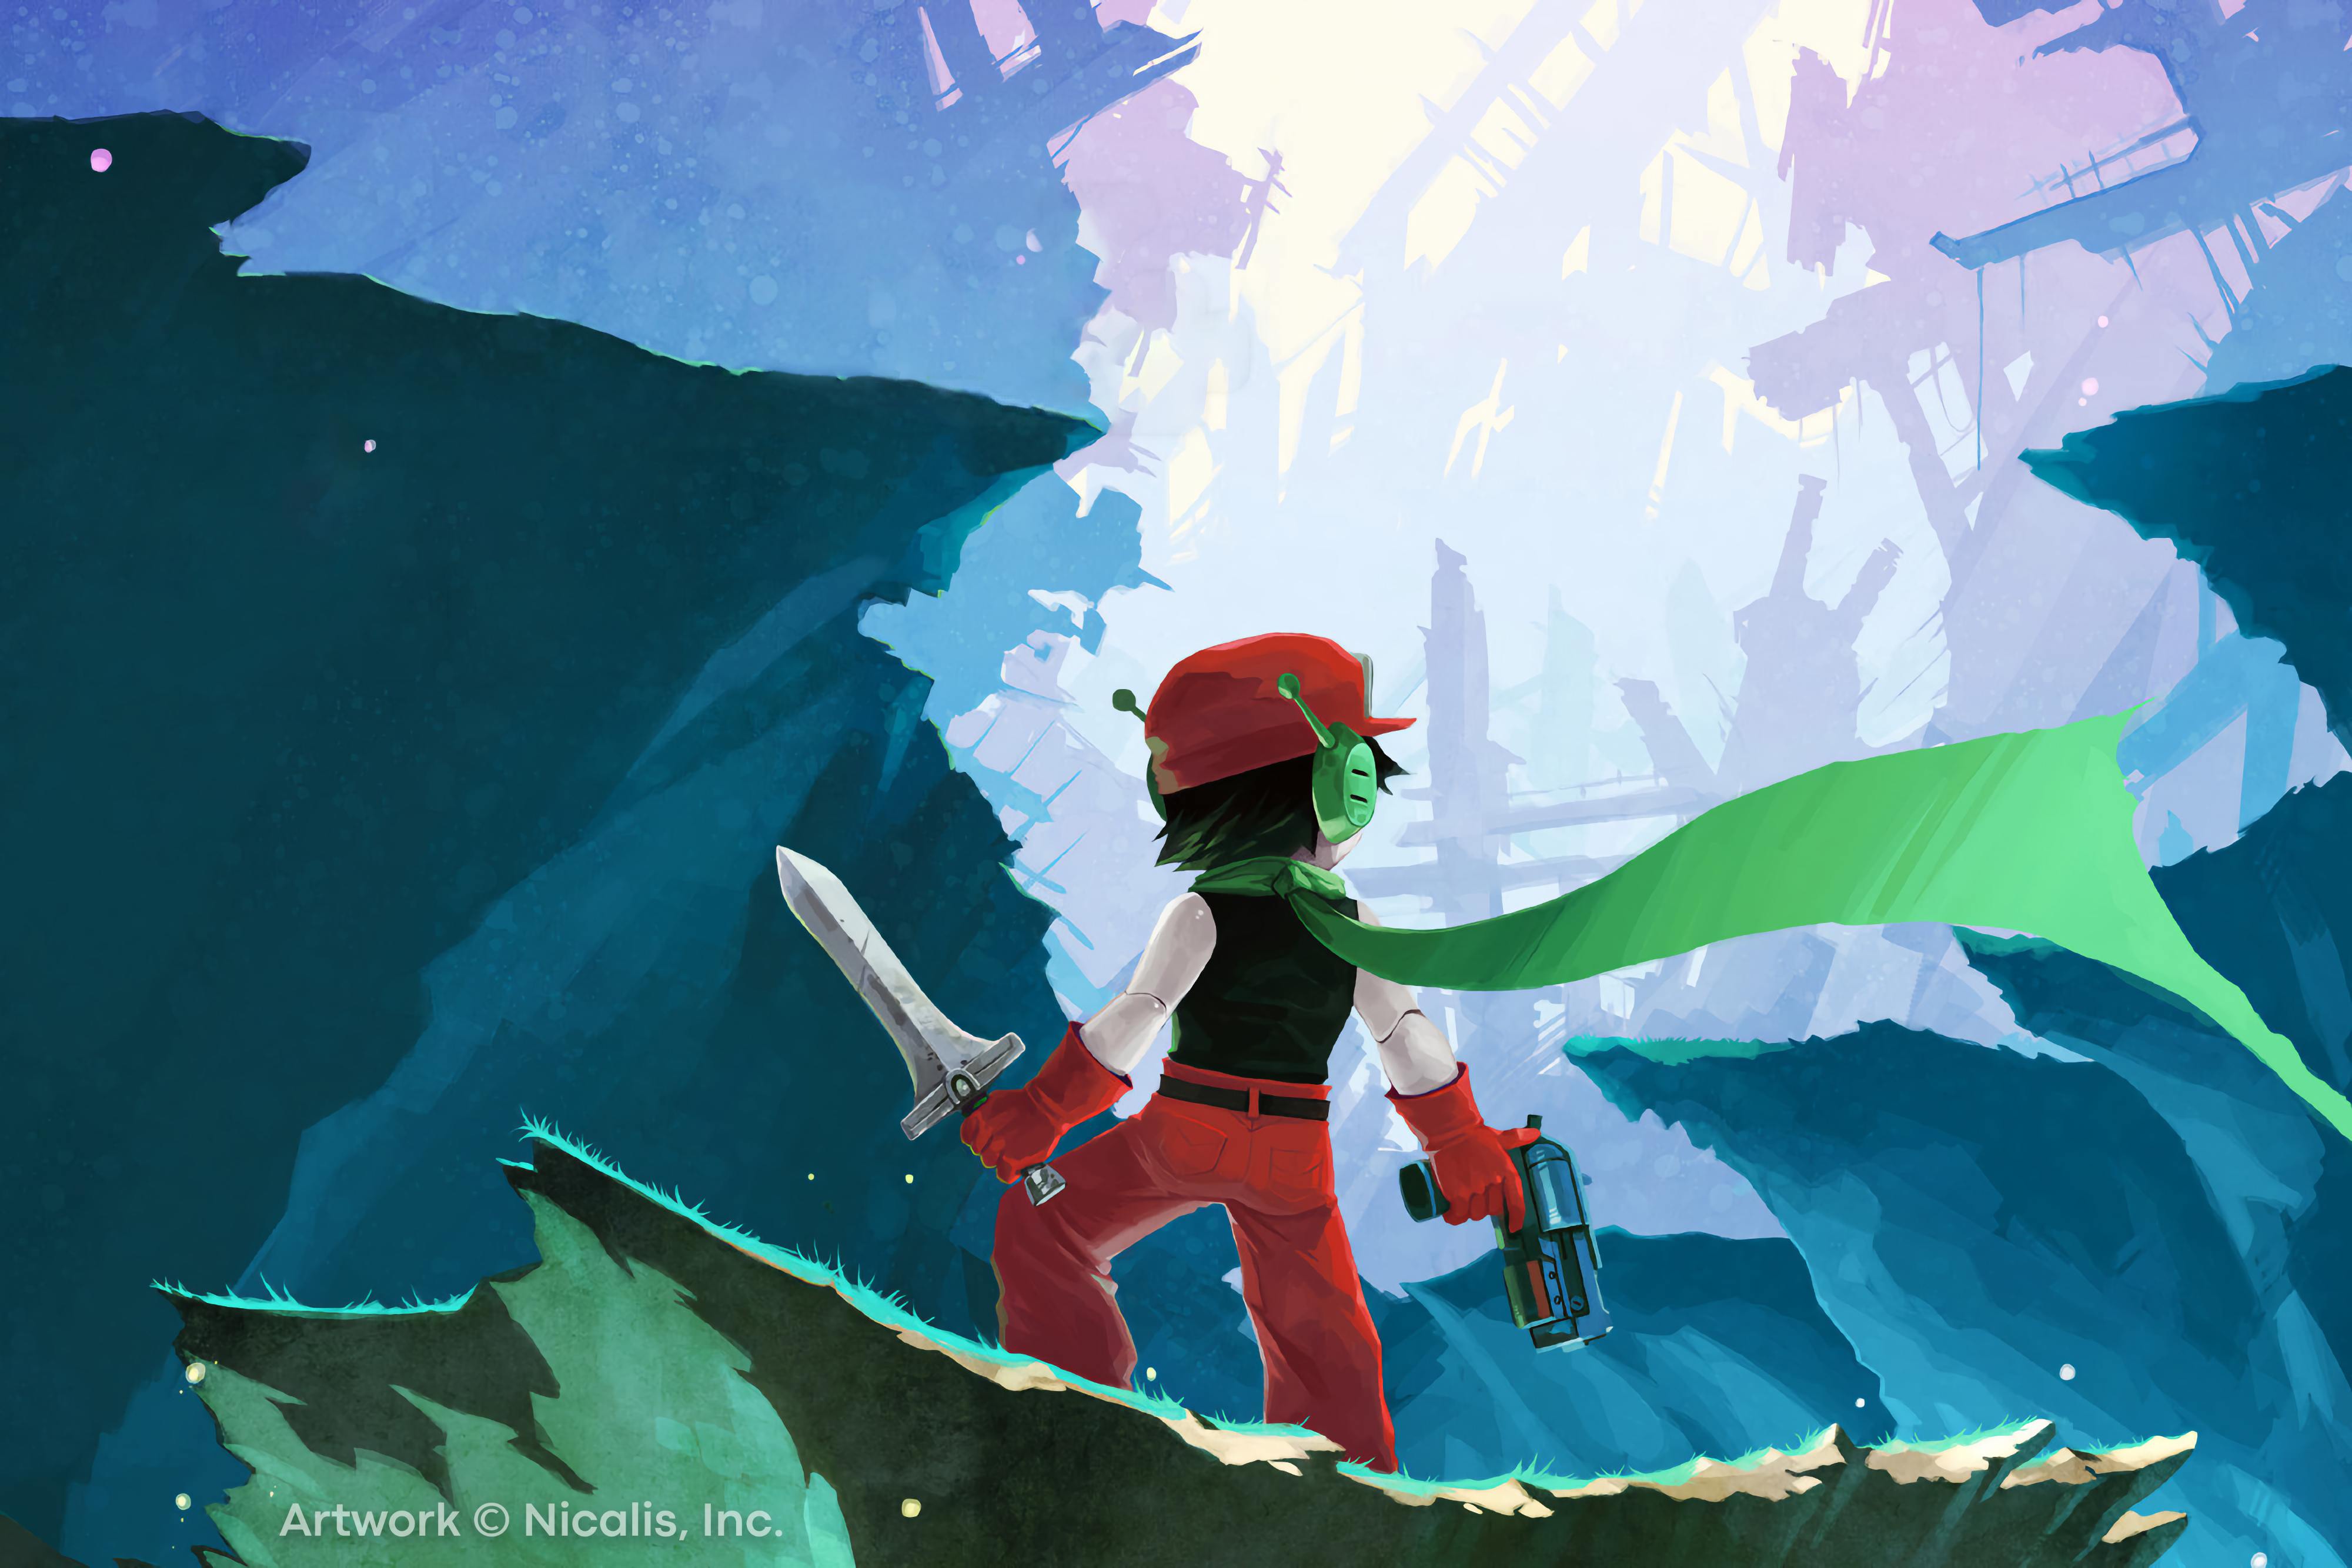 Heroic painting of the protagonist as seen from behind. Scarf flapping in the wind, he gazes upward, holding the Blade in one hand and the Polar Star in the other.